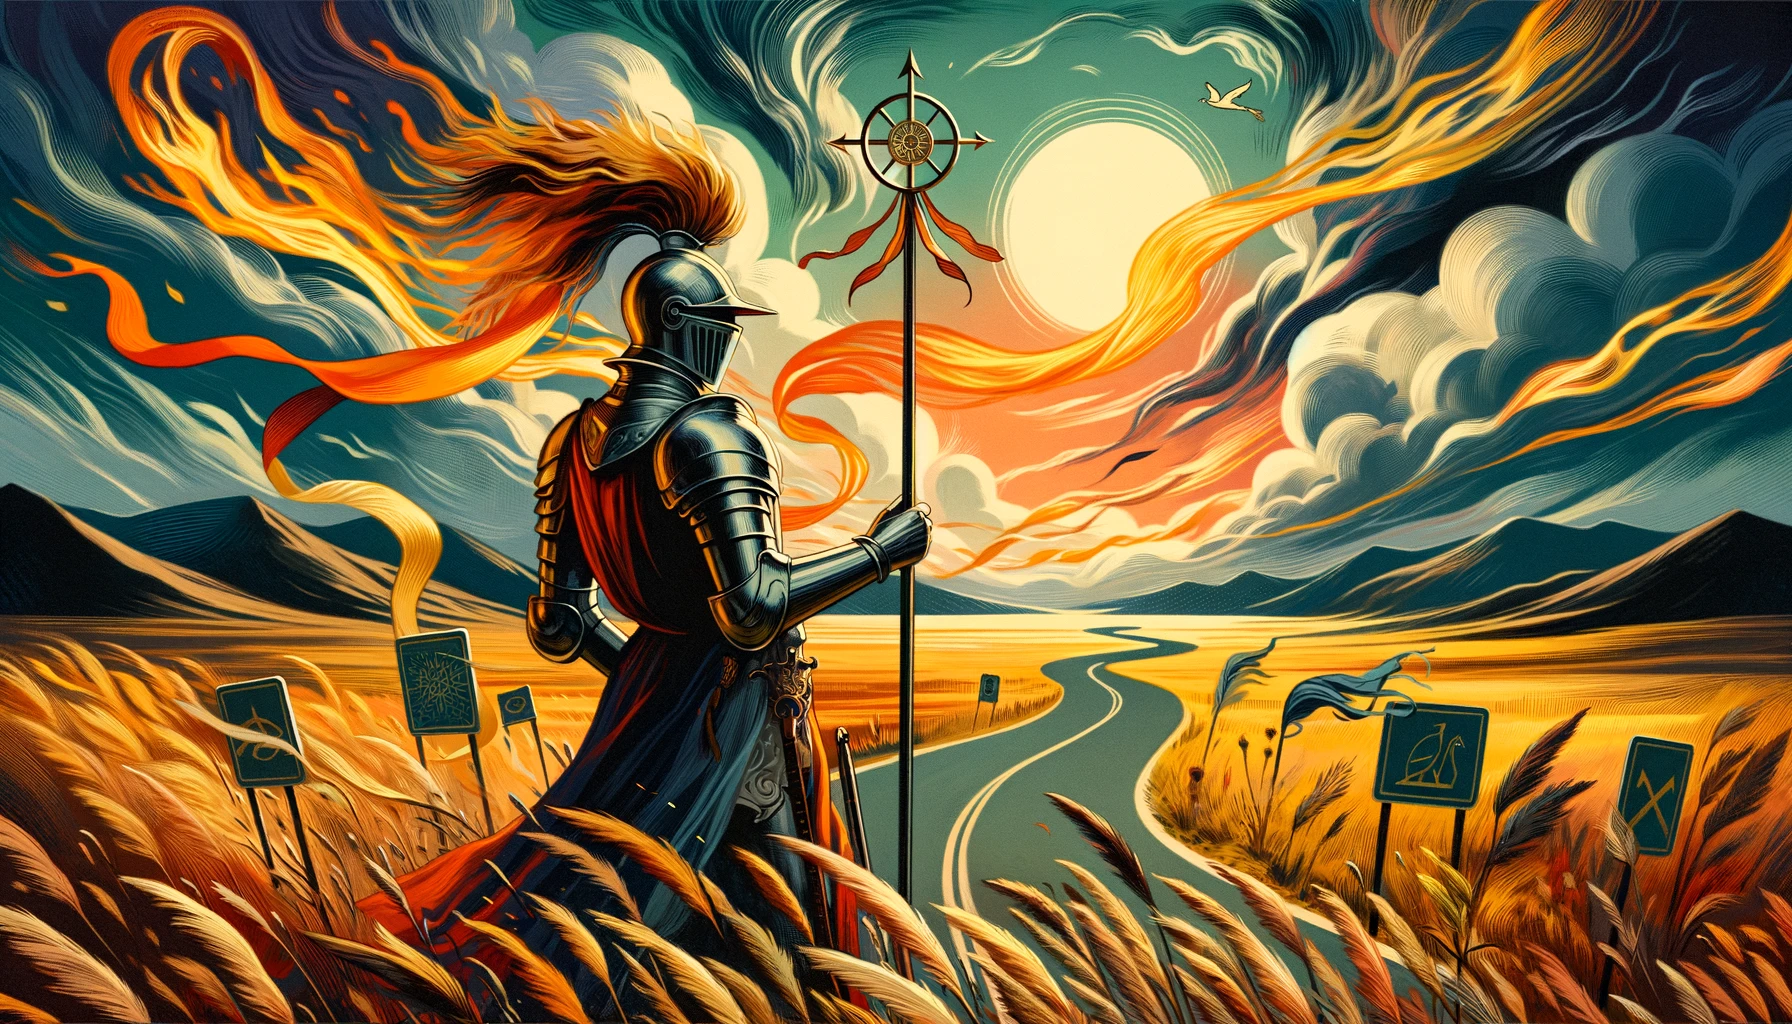 An illustration resembling the Knight of Wands standing confidently amidst symbols of movement and change, symbolizing the desire for action, adventure, and pursuit of passions. The image embodies the card's fiery and passionate nature, depicting boundless opportunities and personal aspirations.